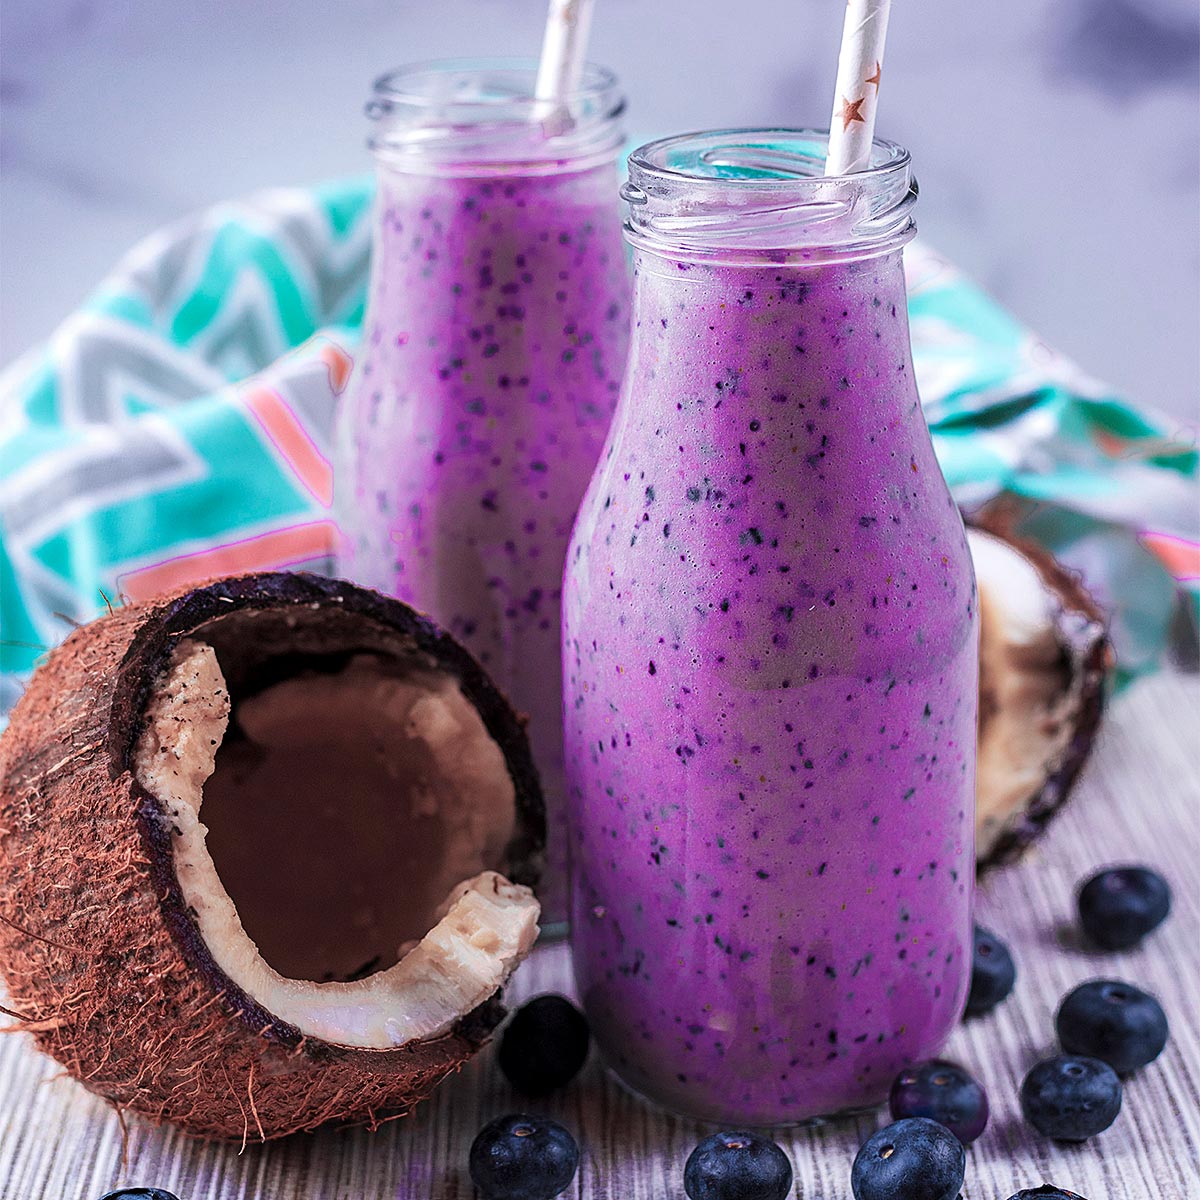 Nutra Ninja Coconut Berry Smoothie Recipe - Cooking With Ruthie